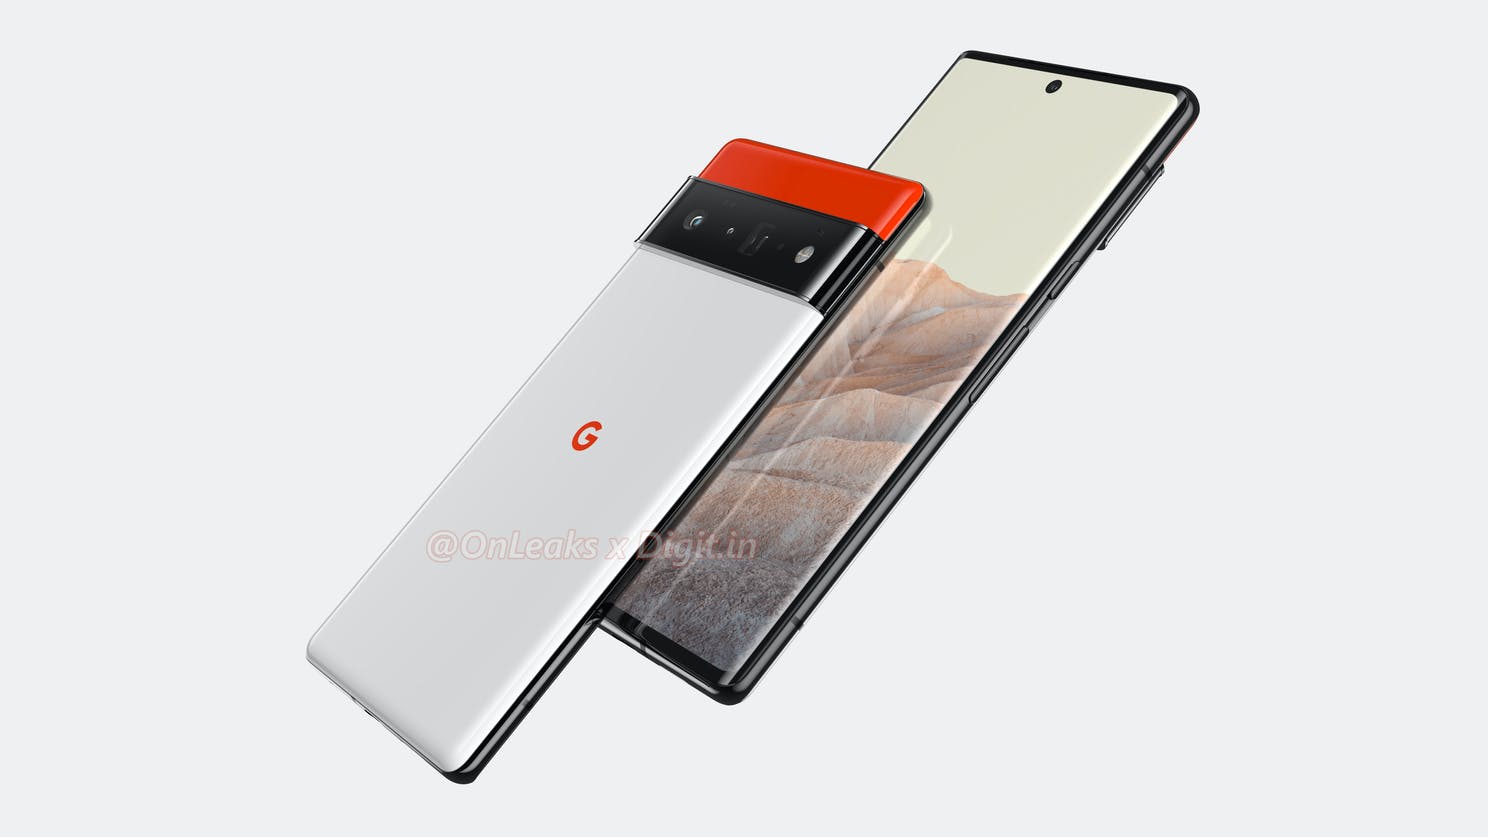 Google Pixel 6 Pro: leaked new renderings and periscope camera